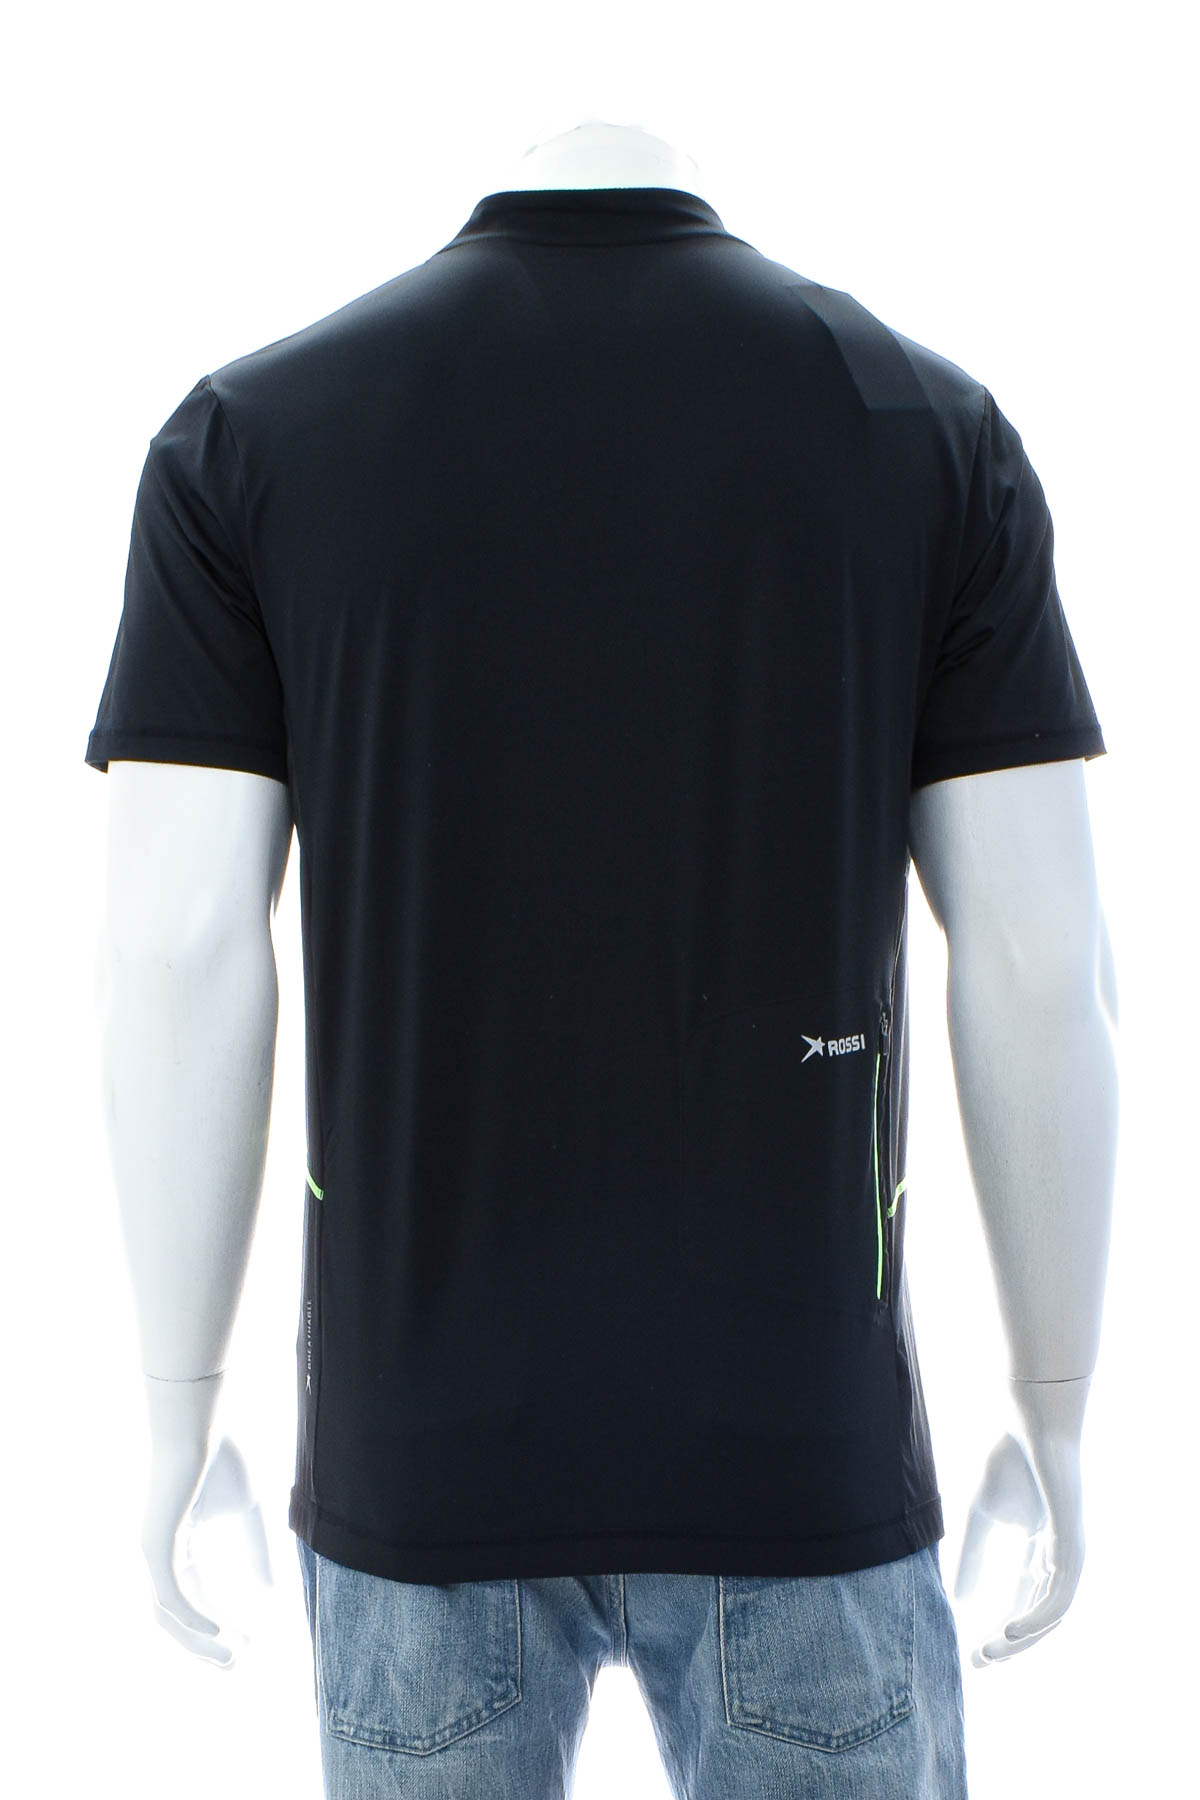 Men's T-shirt for cycling - Rossi - 1